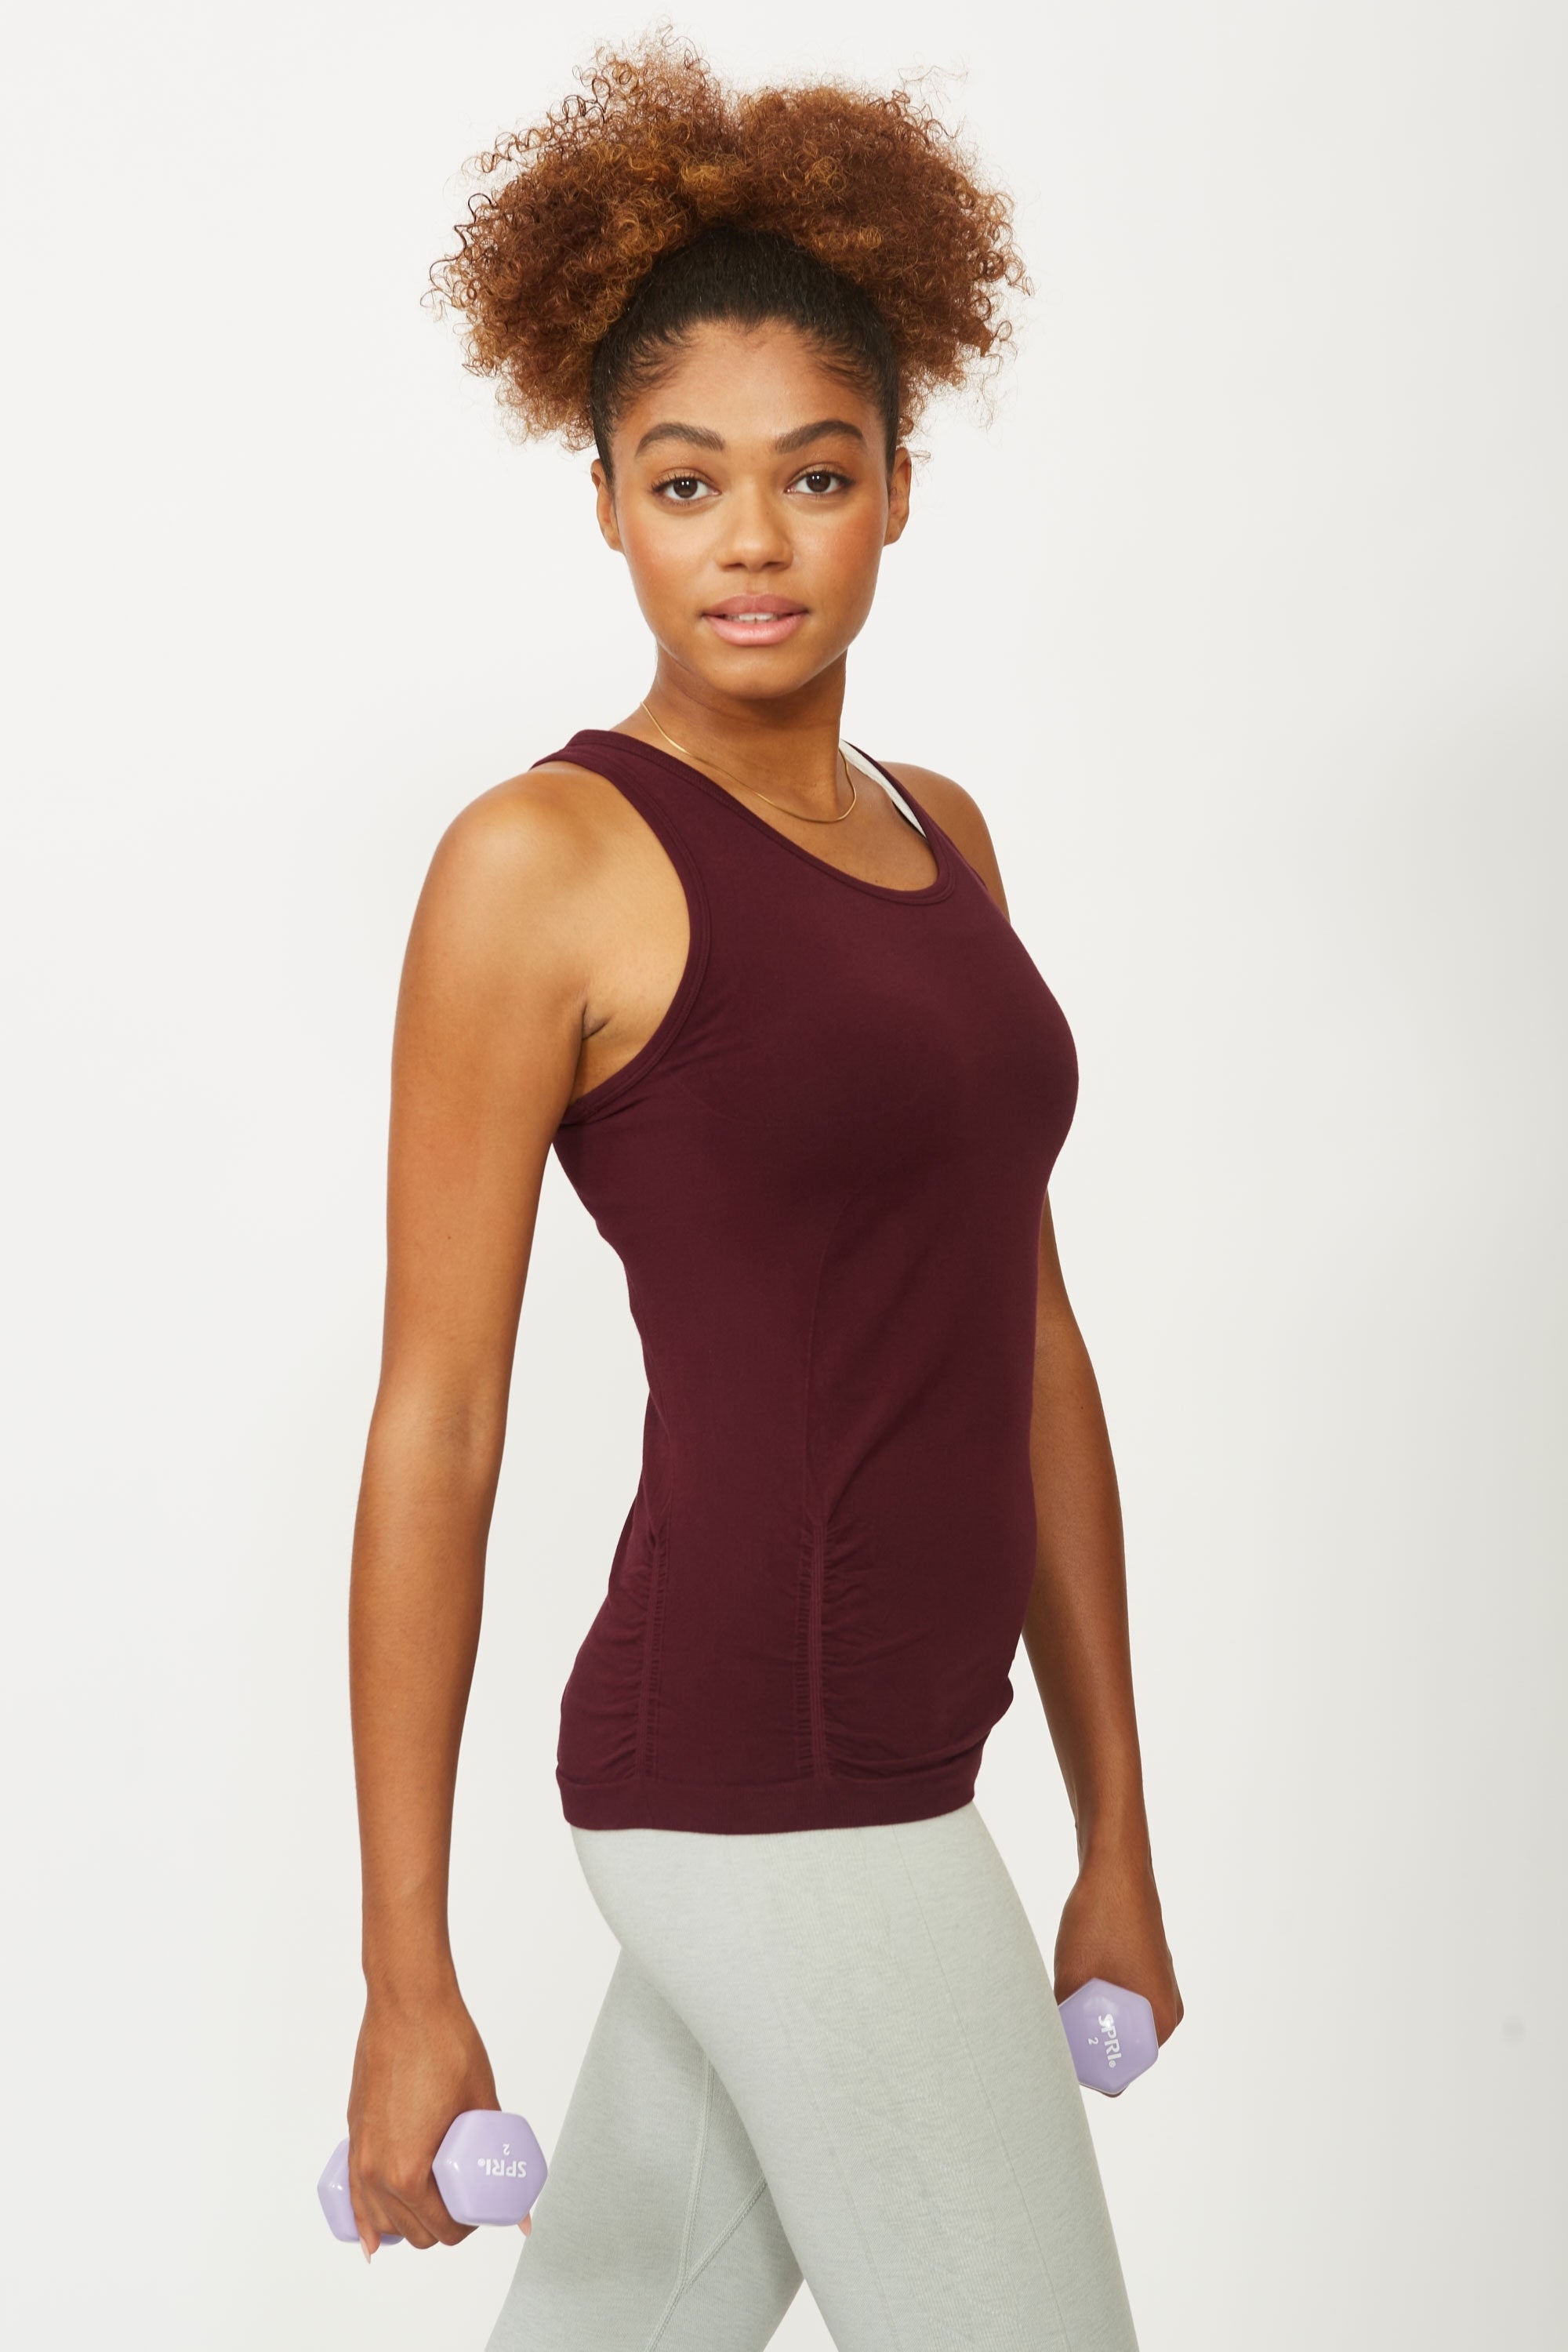 Model wearing cherry red sports tank top for sustainable activewear brand, Jilla.